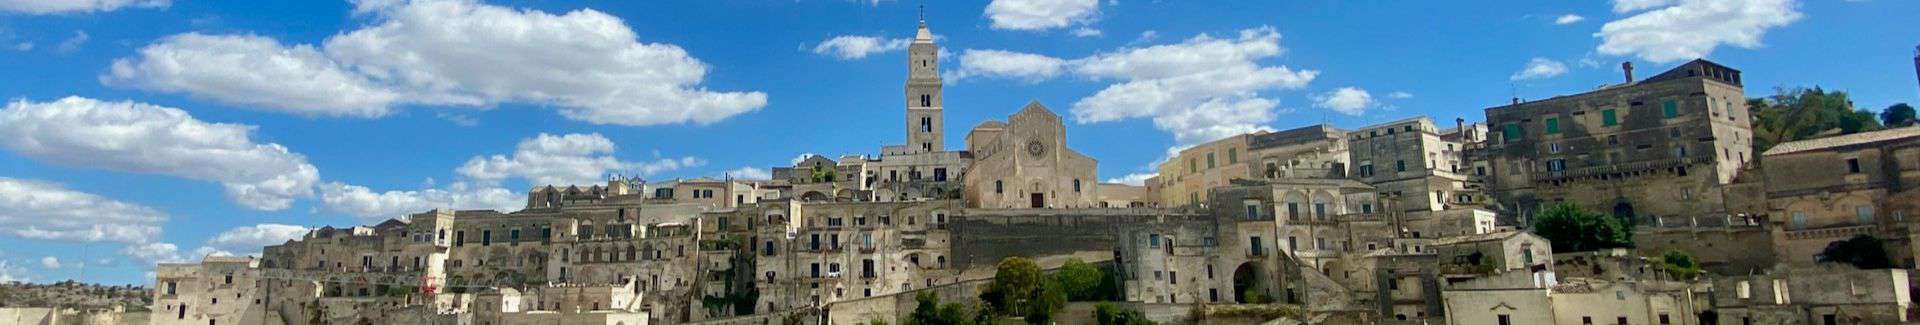 Top Thirteen Luxury Hotels in Matera Italy Banner